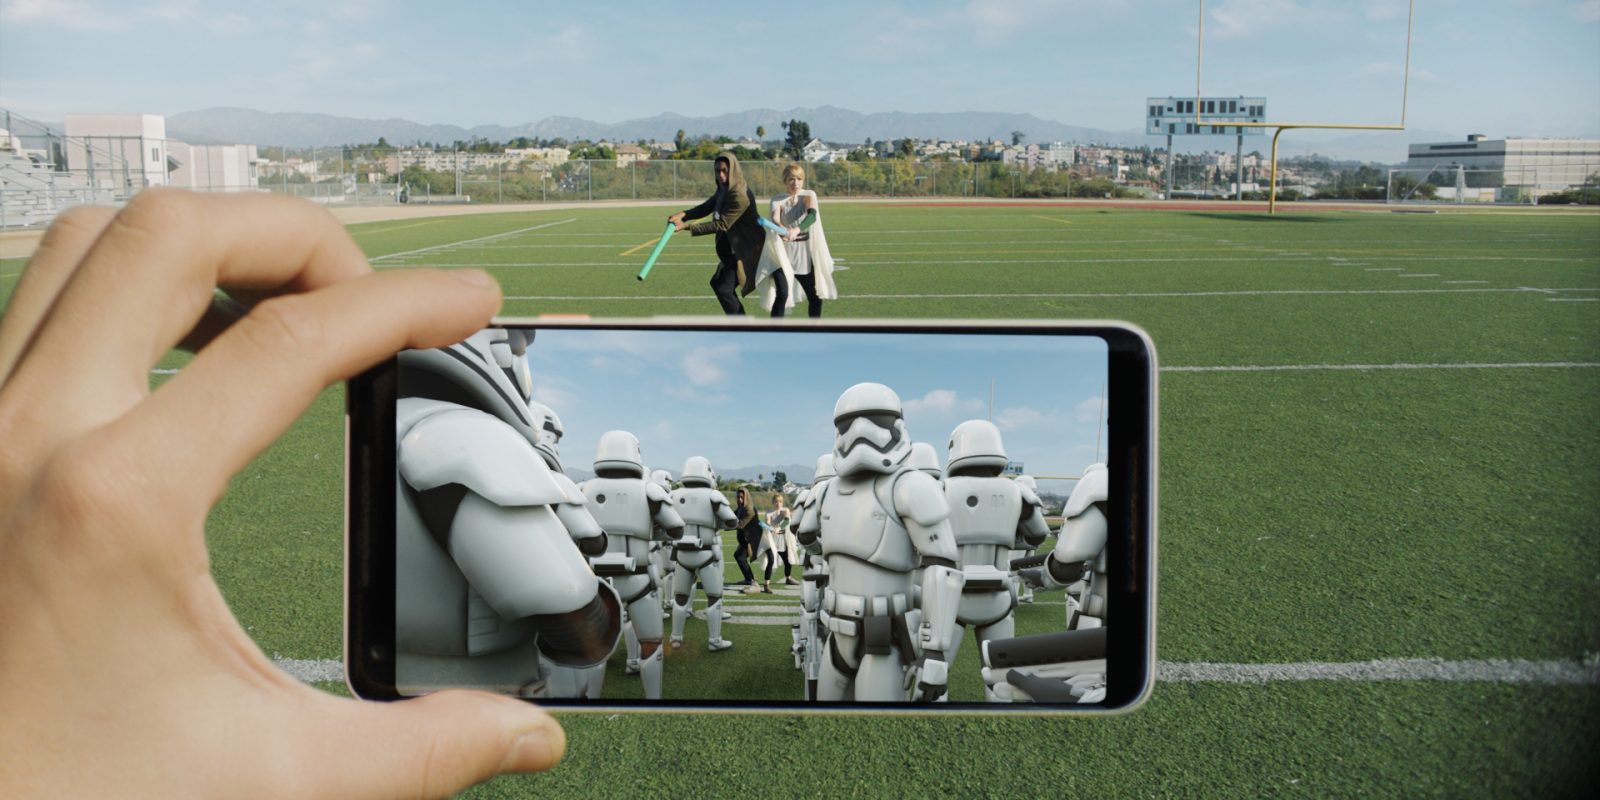 Google brings AR stickers on Pixel devices featuring The Last Jedi and Stranger Things characters